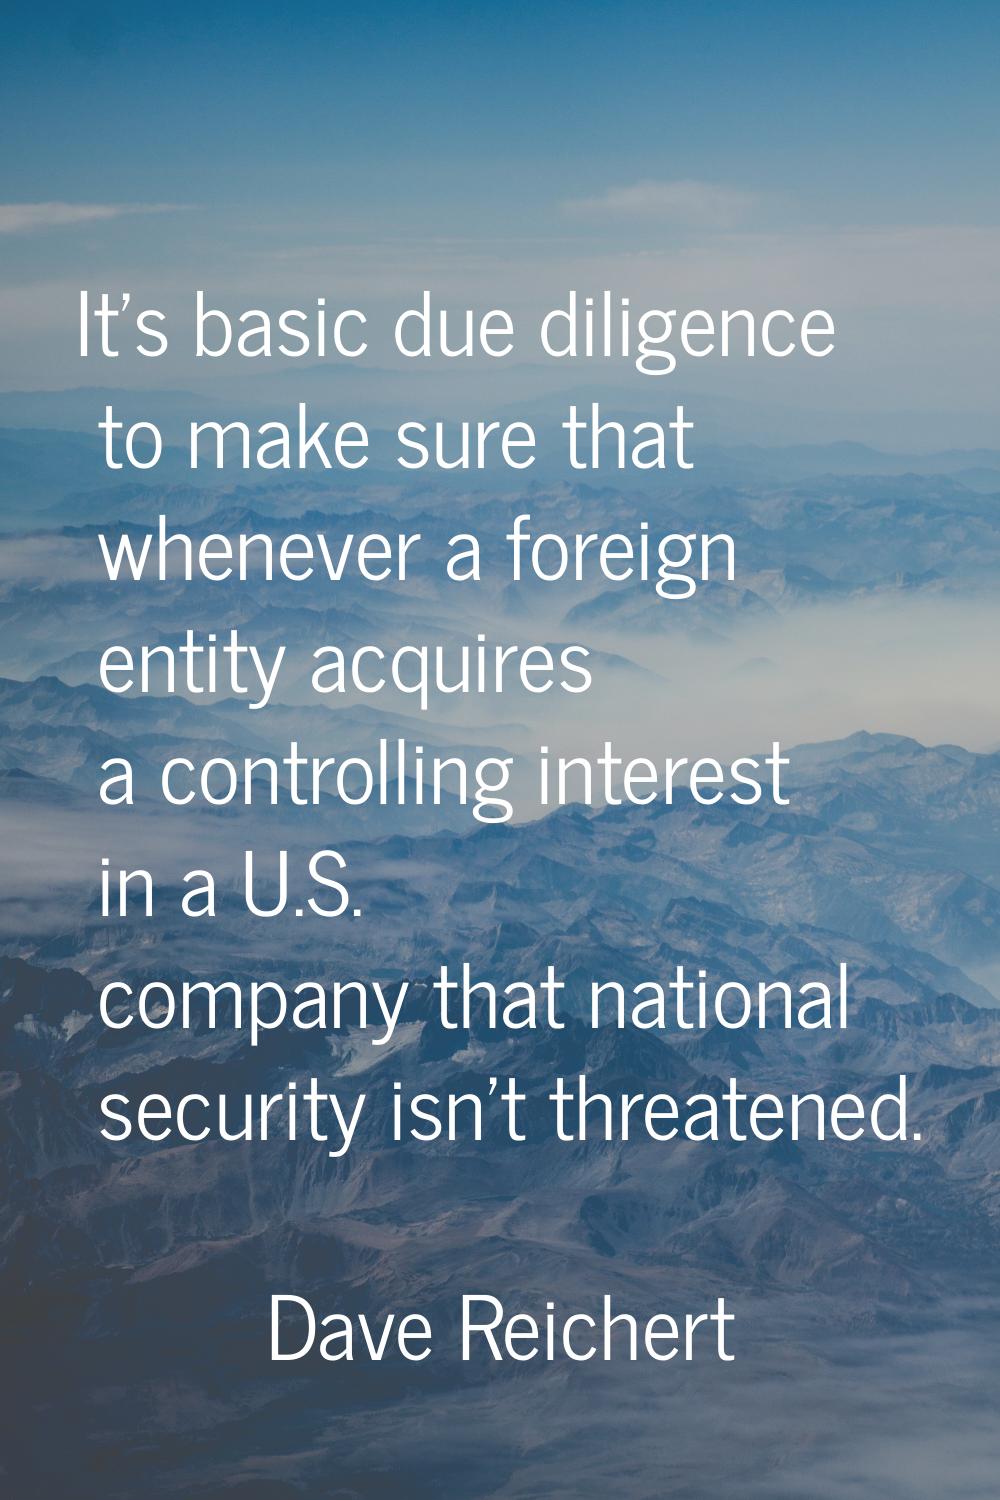 It's basic due diligence to make sure that whenever a foreign entity acquires a controlling interes